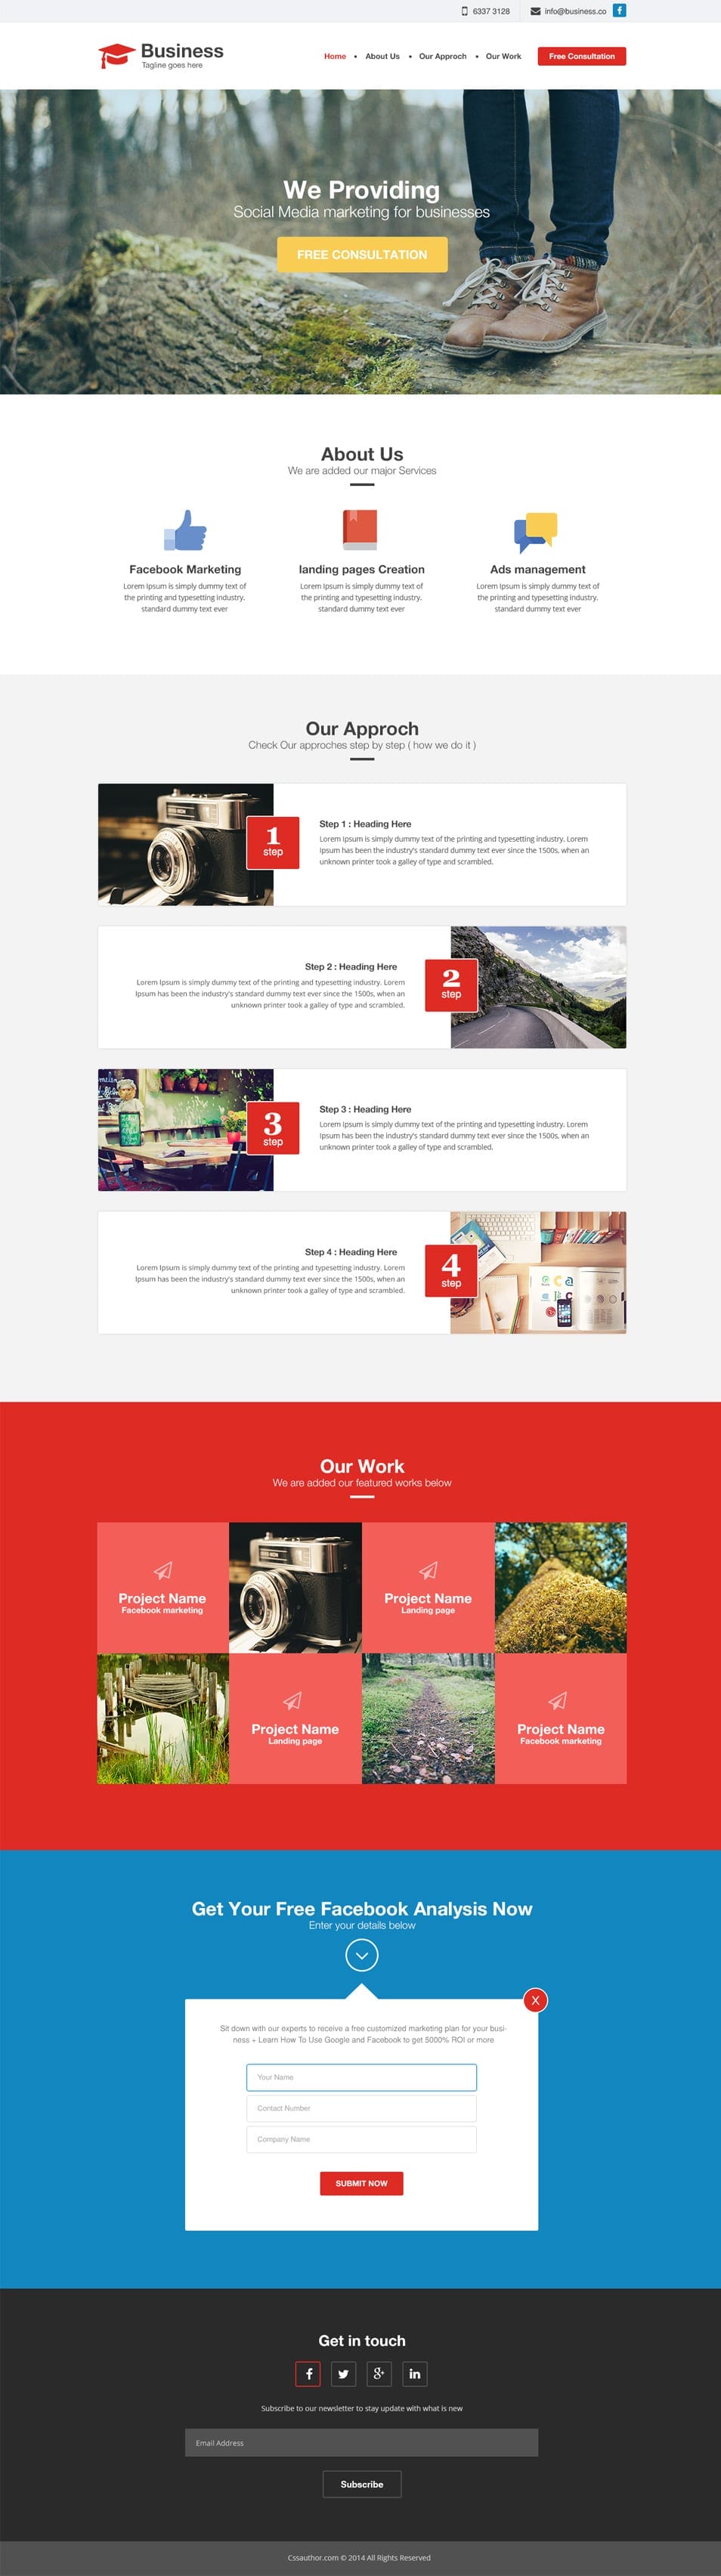 Agency / Business Website Template PSDCSS Author Web Design Resources